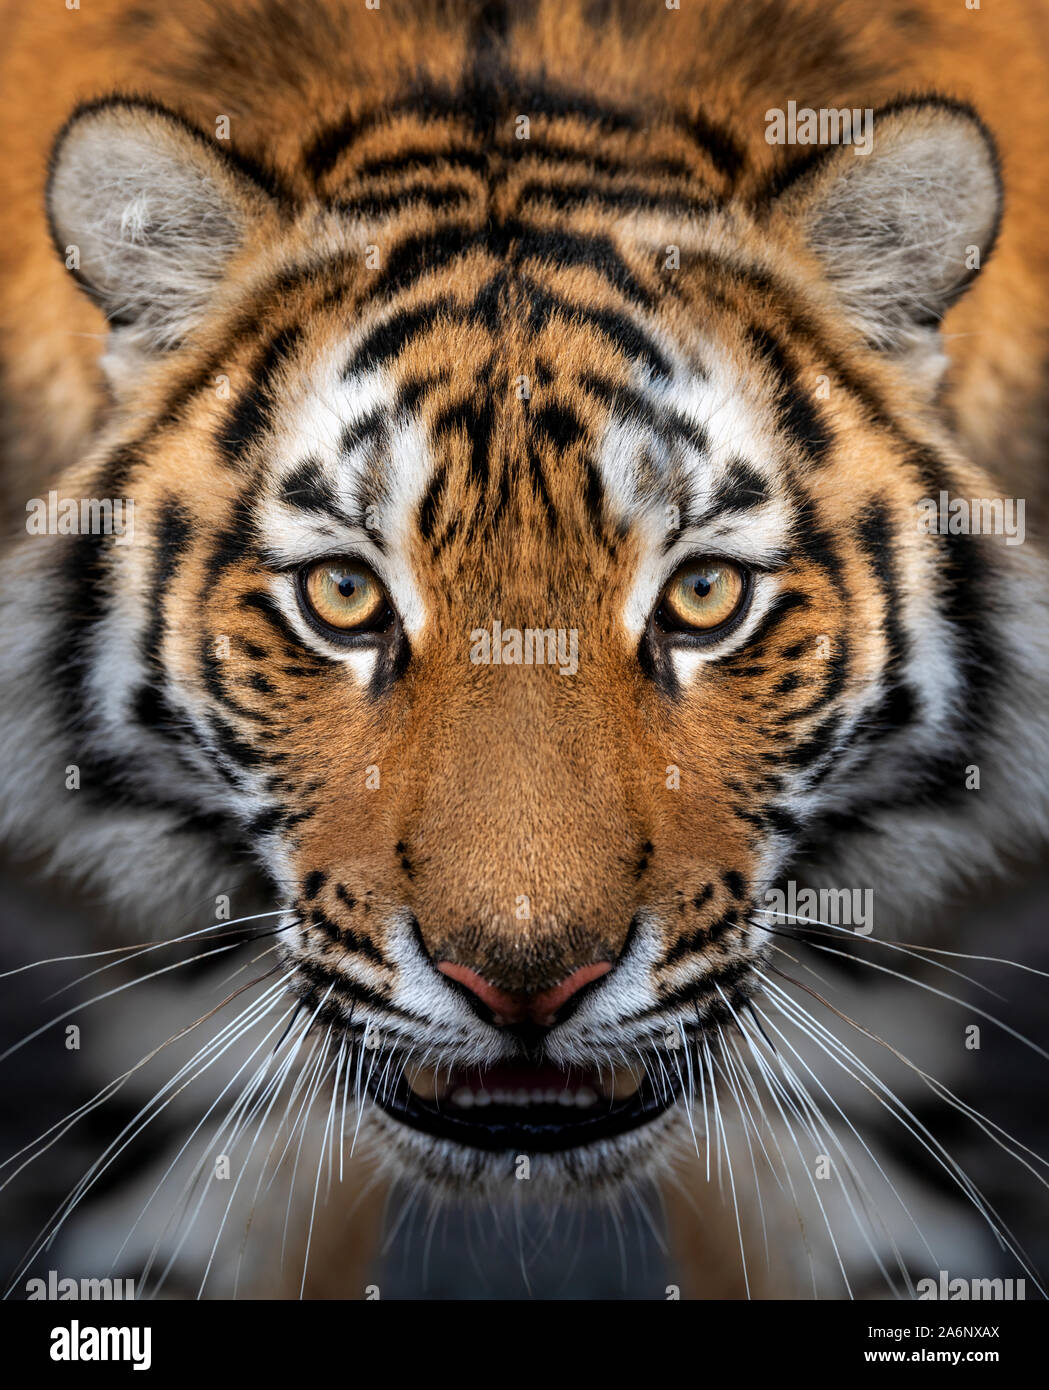 4,251 Tiger Front View Images, Stock Photos, 3D objects, & Vectors